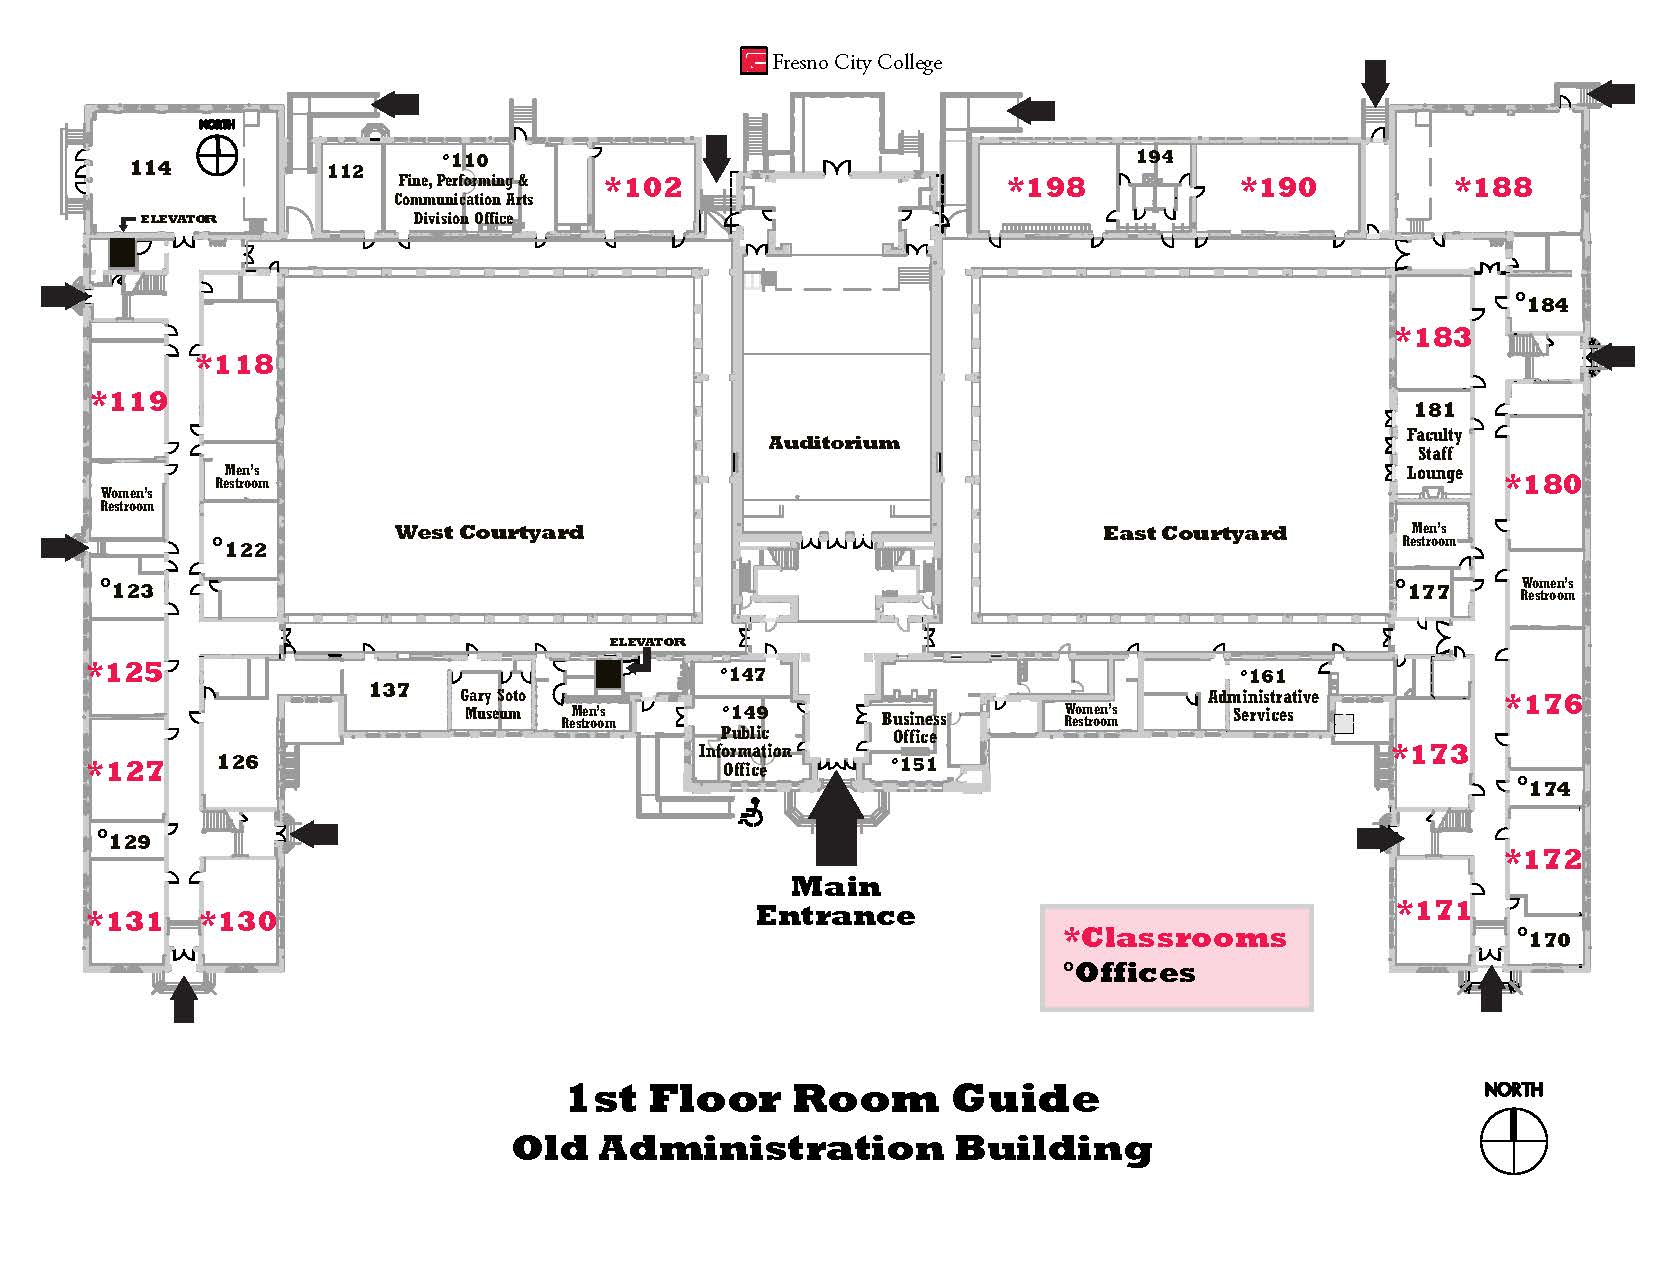 OAB first floor map